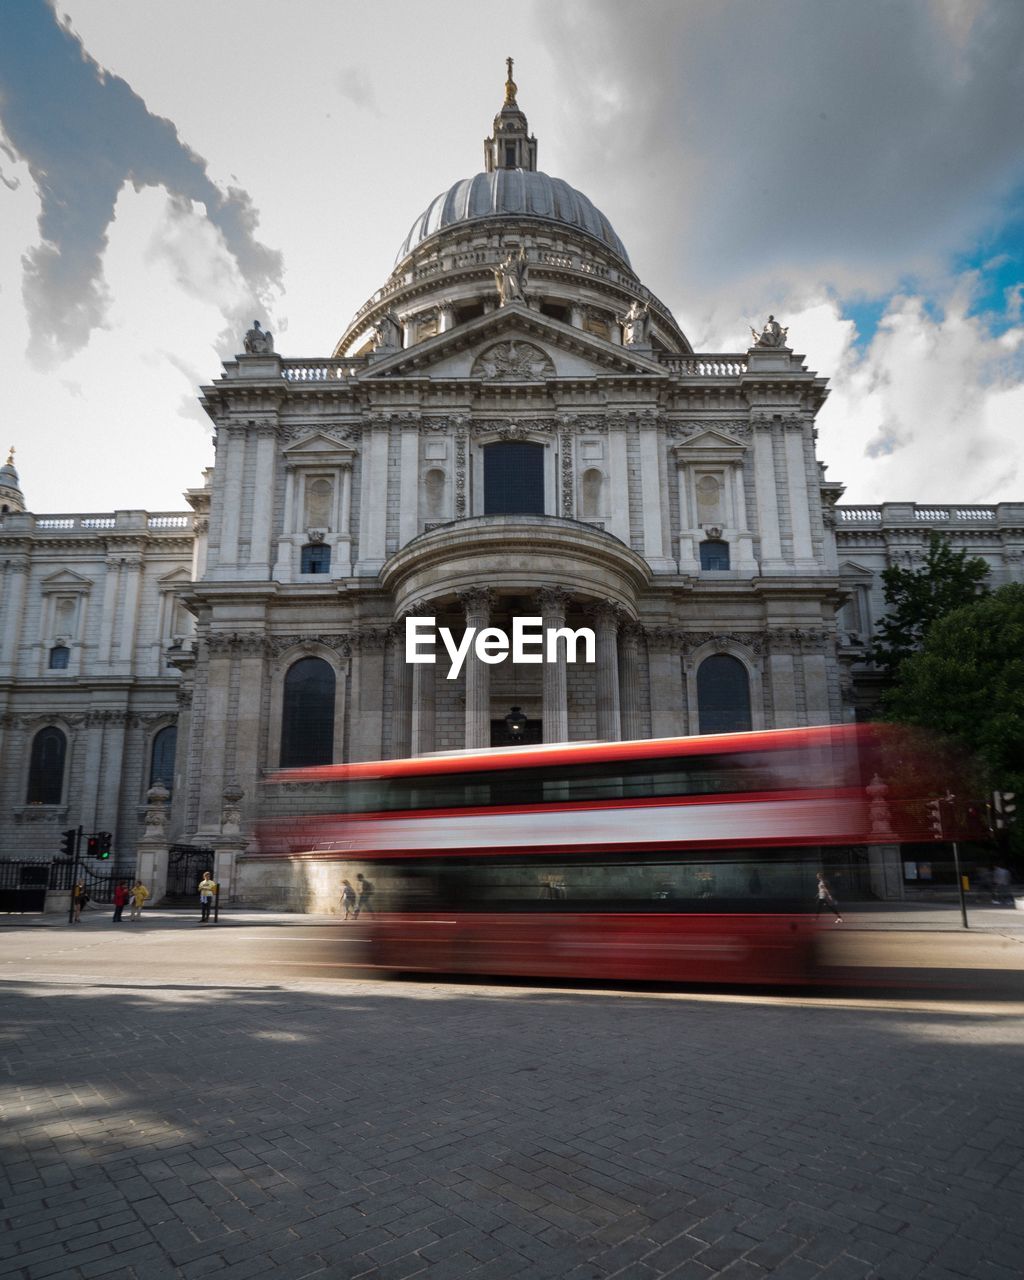 Blurred motion of bus on road against st paul cathedral